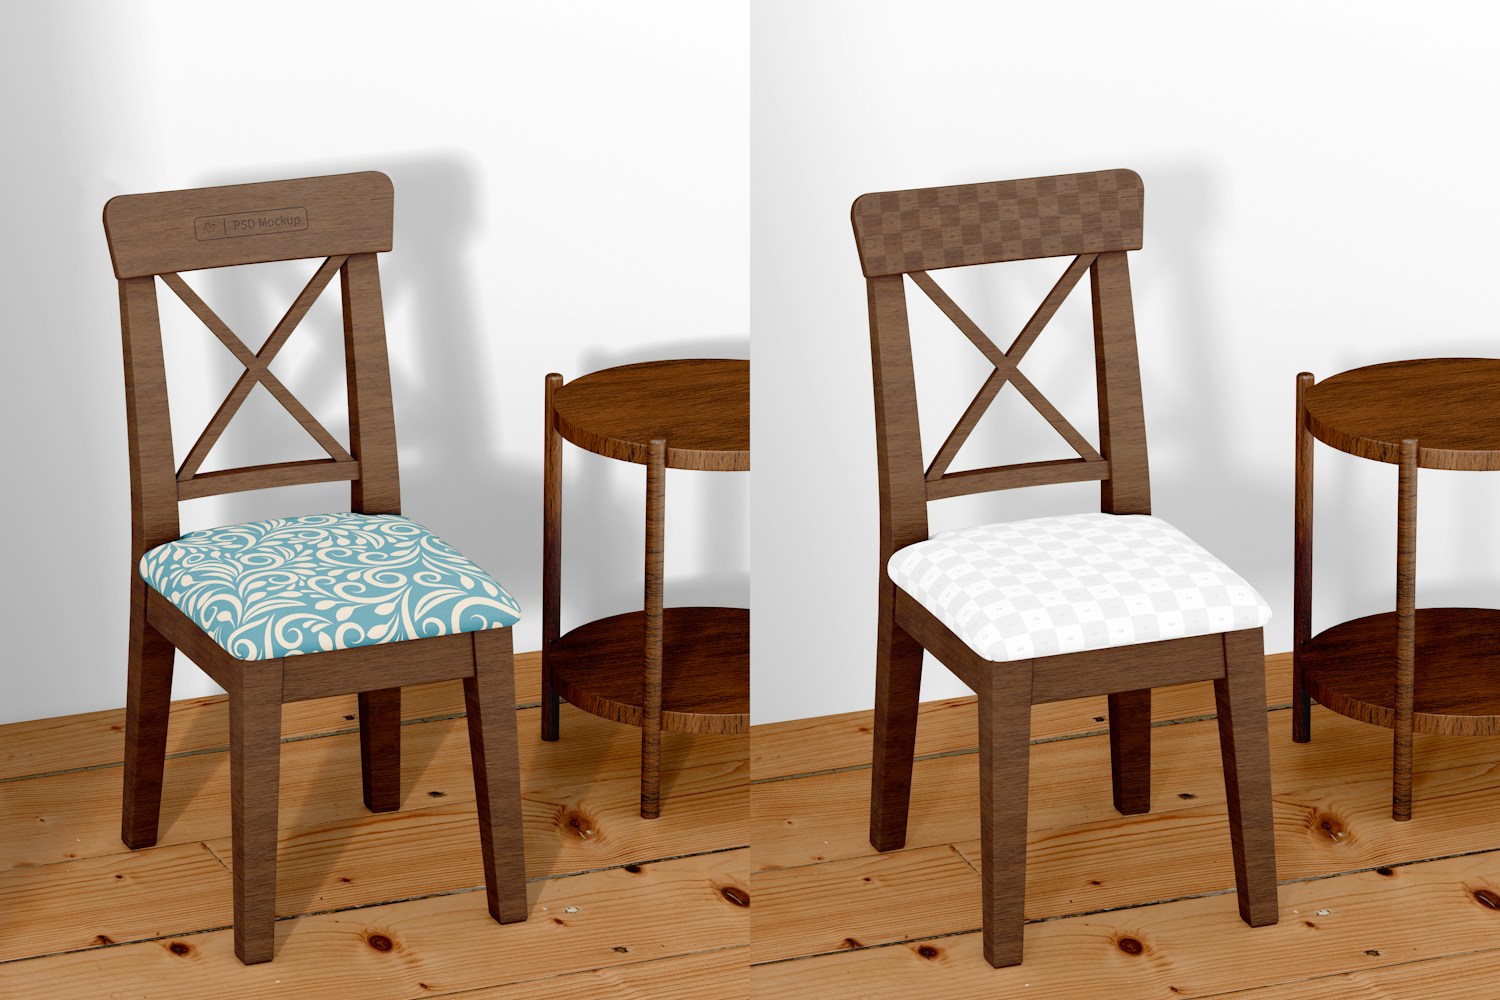 Wooden Dining Chair Mockup, Front View